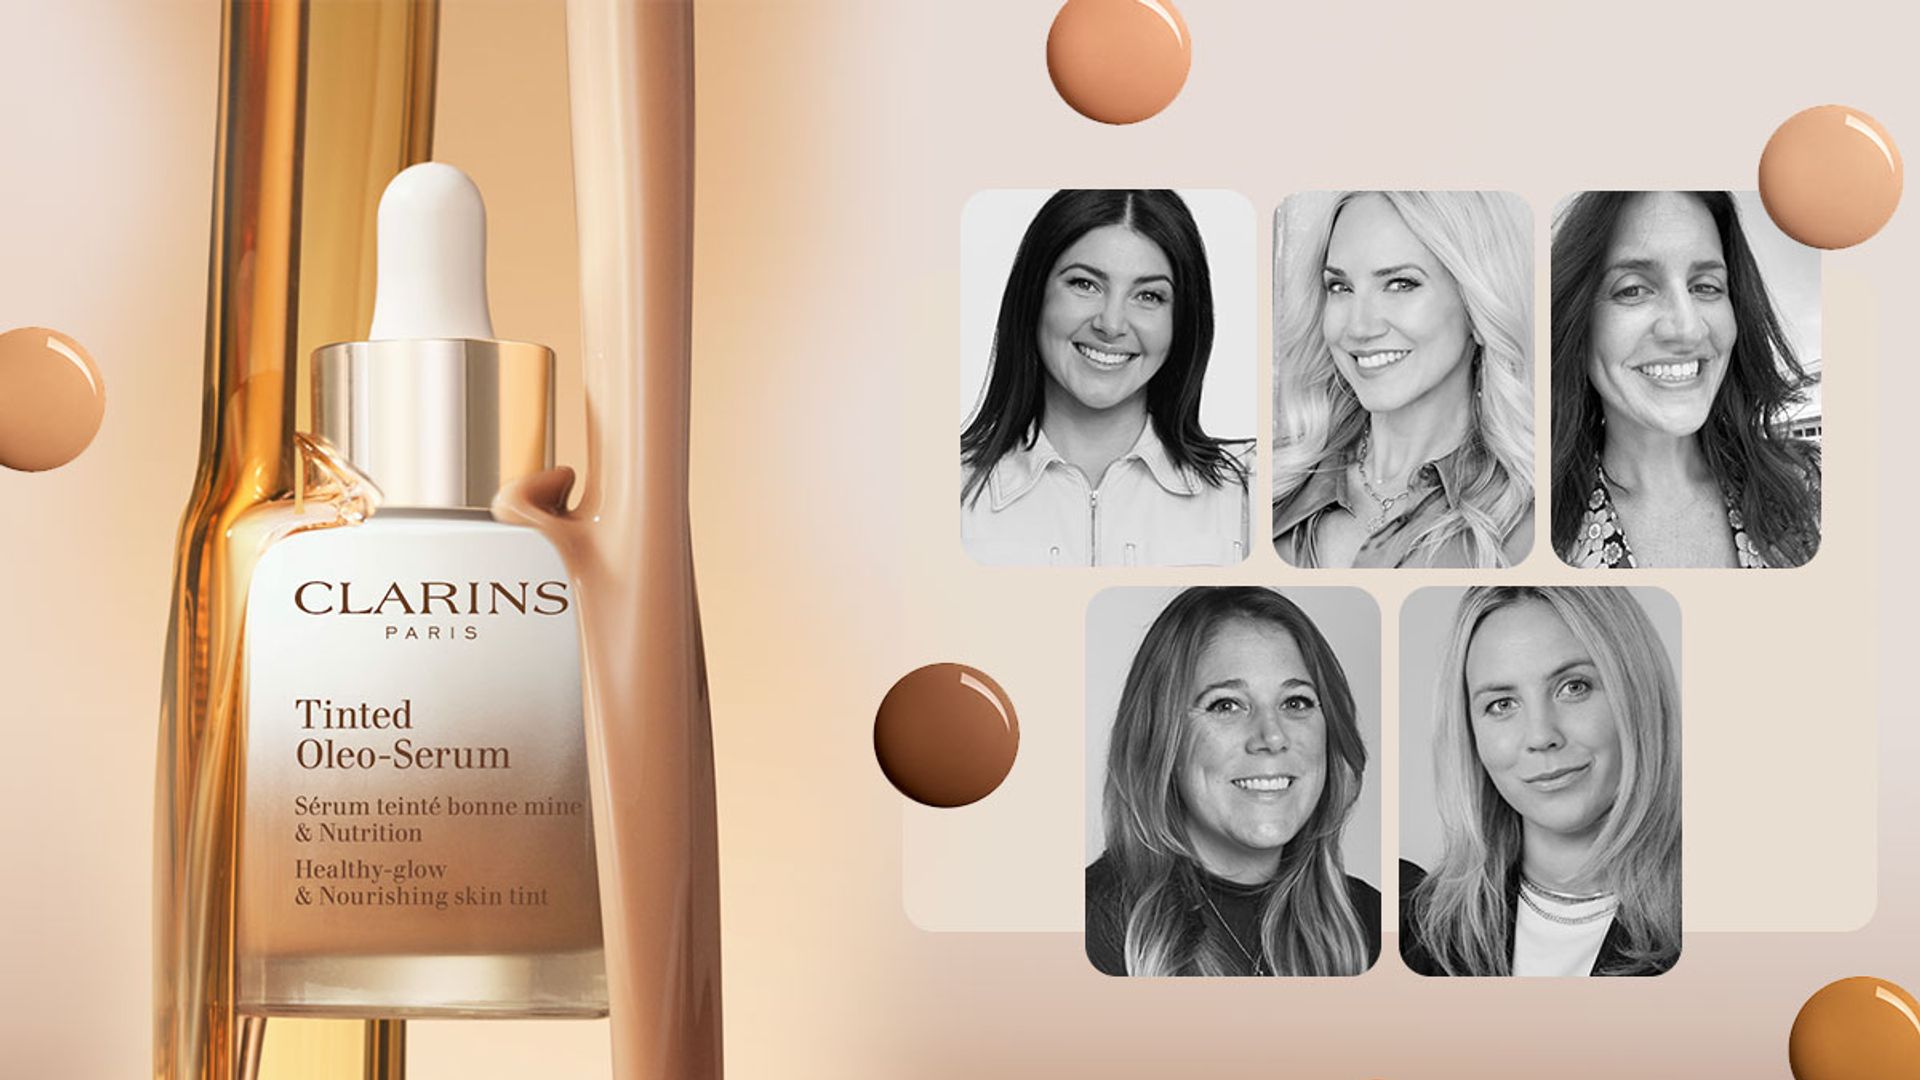 Our beauty editors agree this new tinted serum makes an ideal base for midlife skin – here’s why